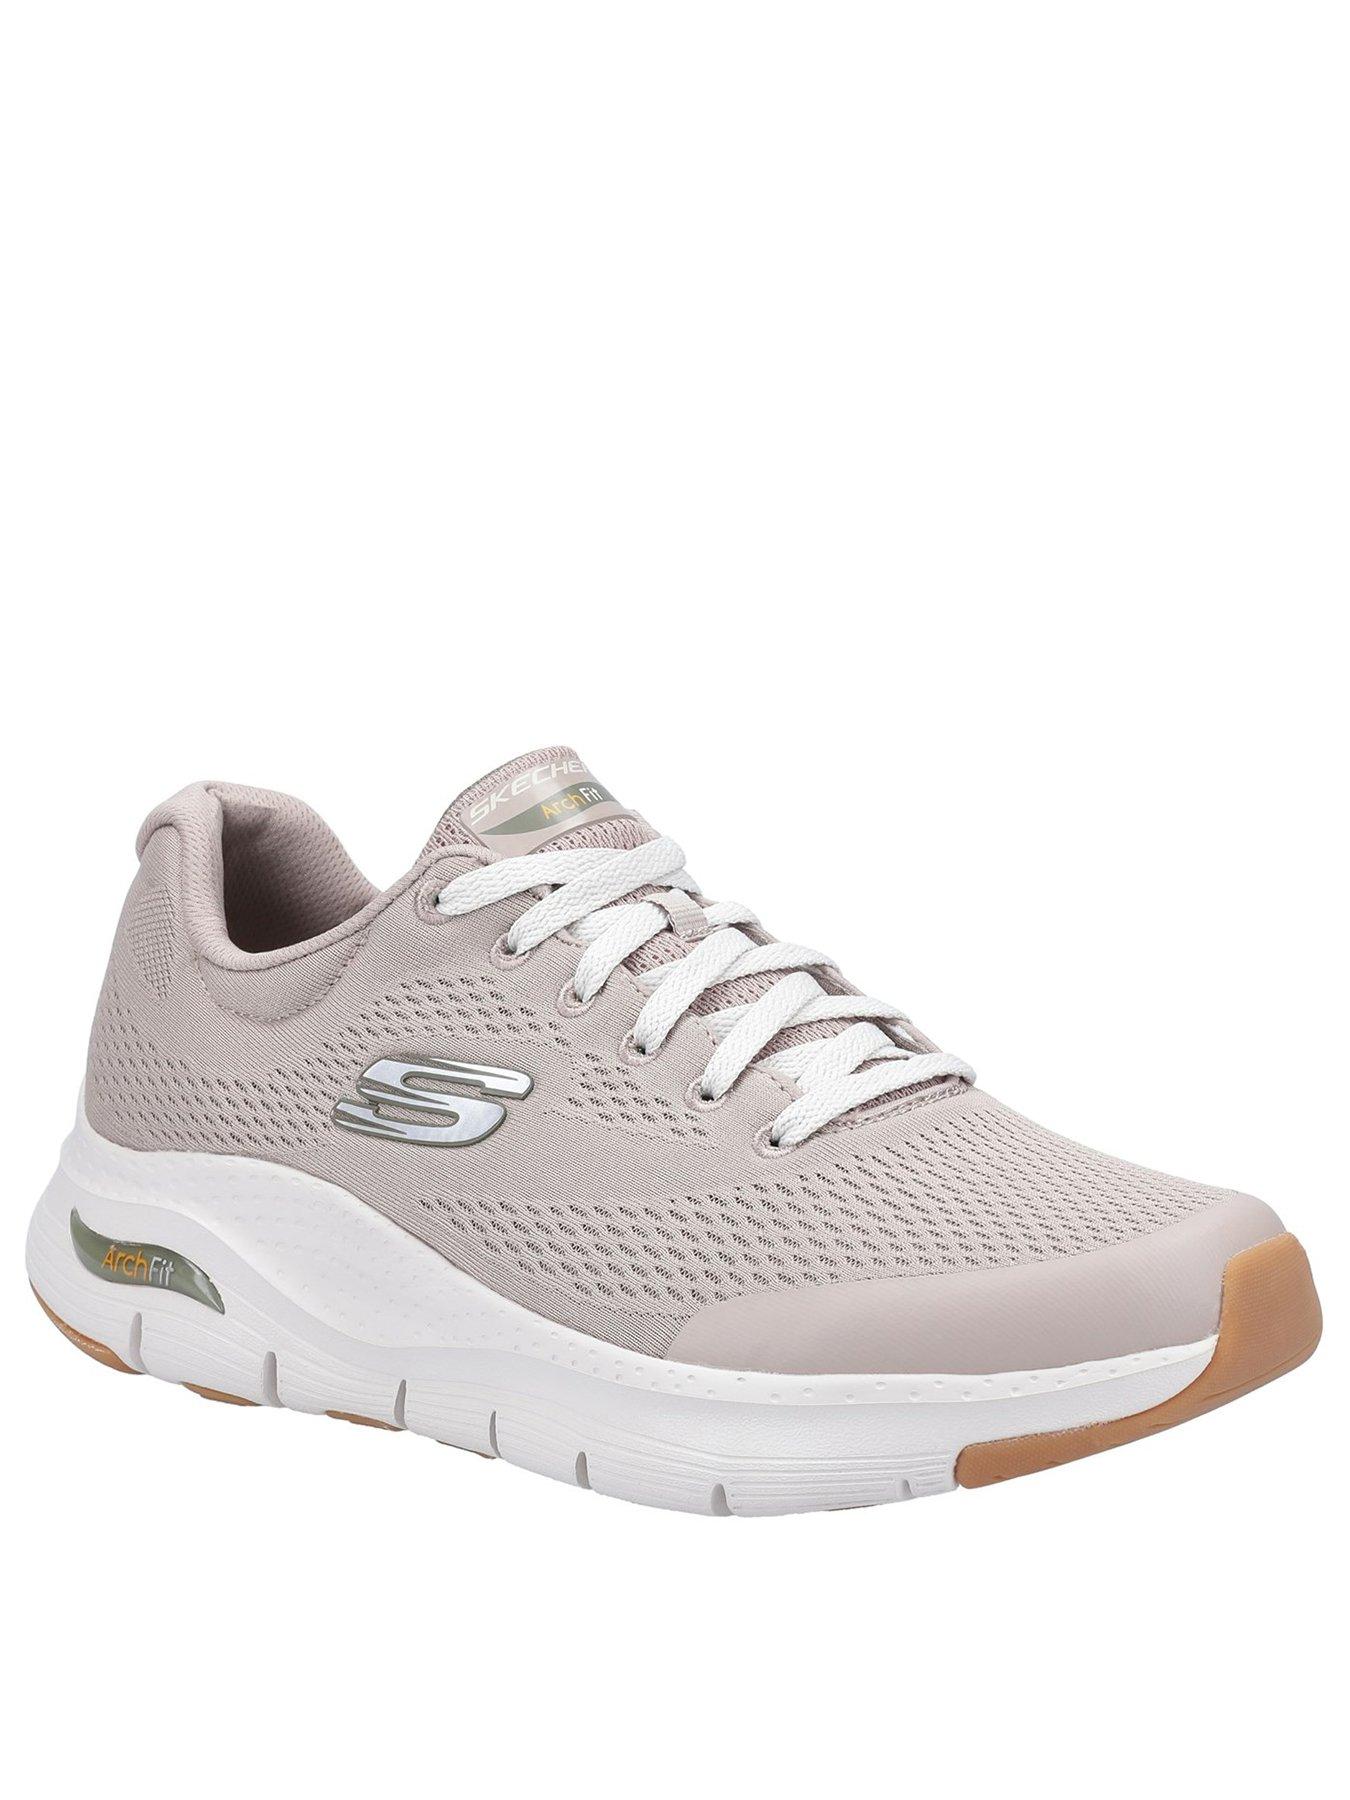 Skechers Arch Fit Lace Up Trainers 